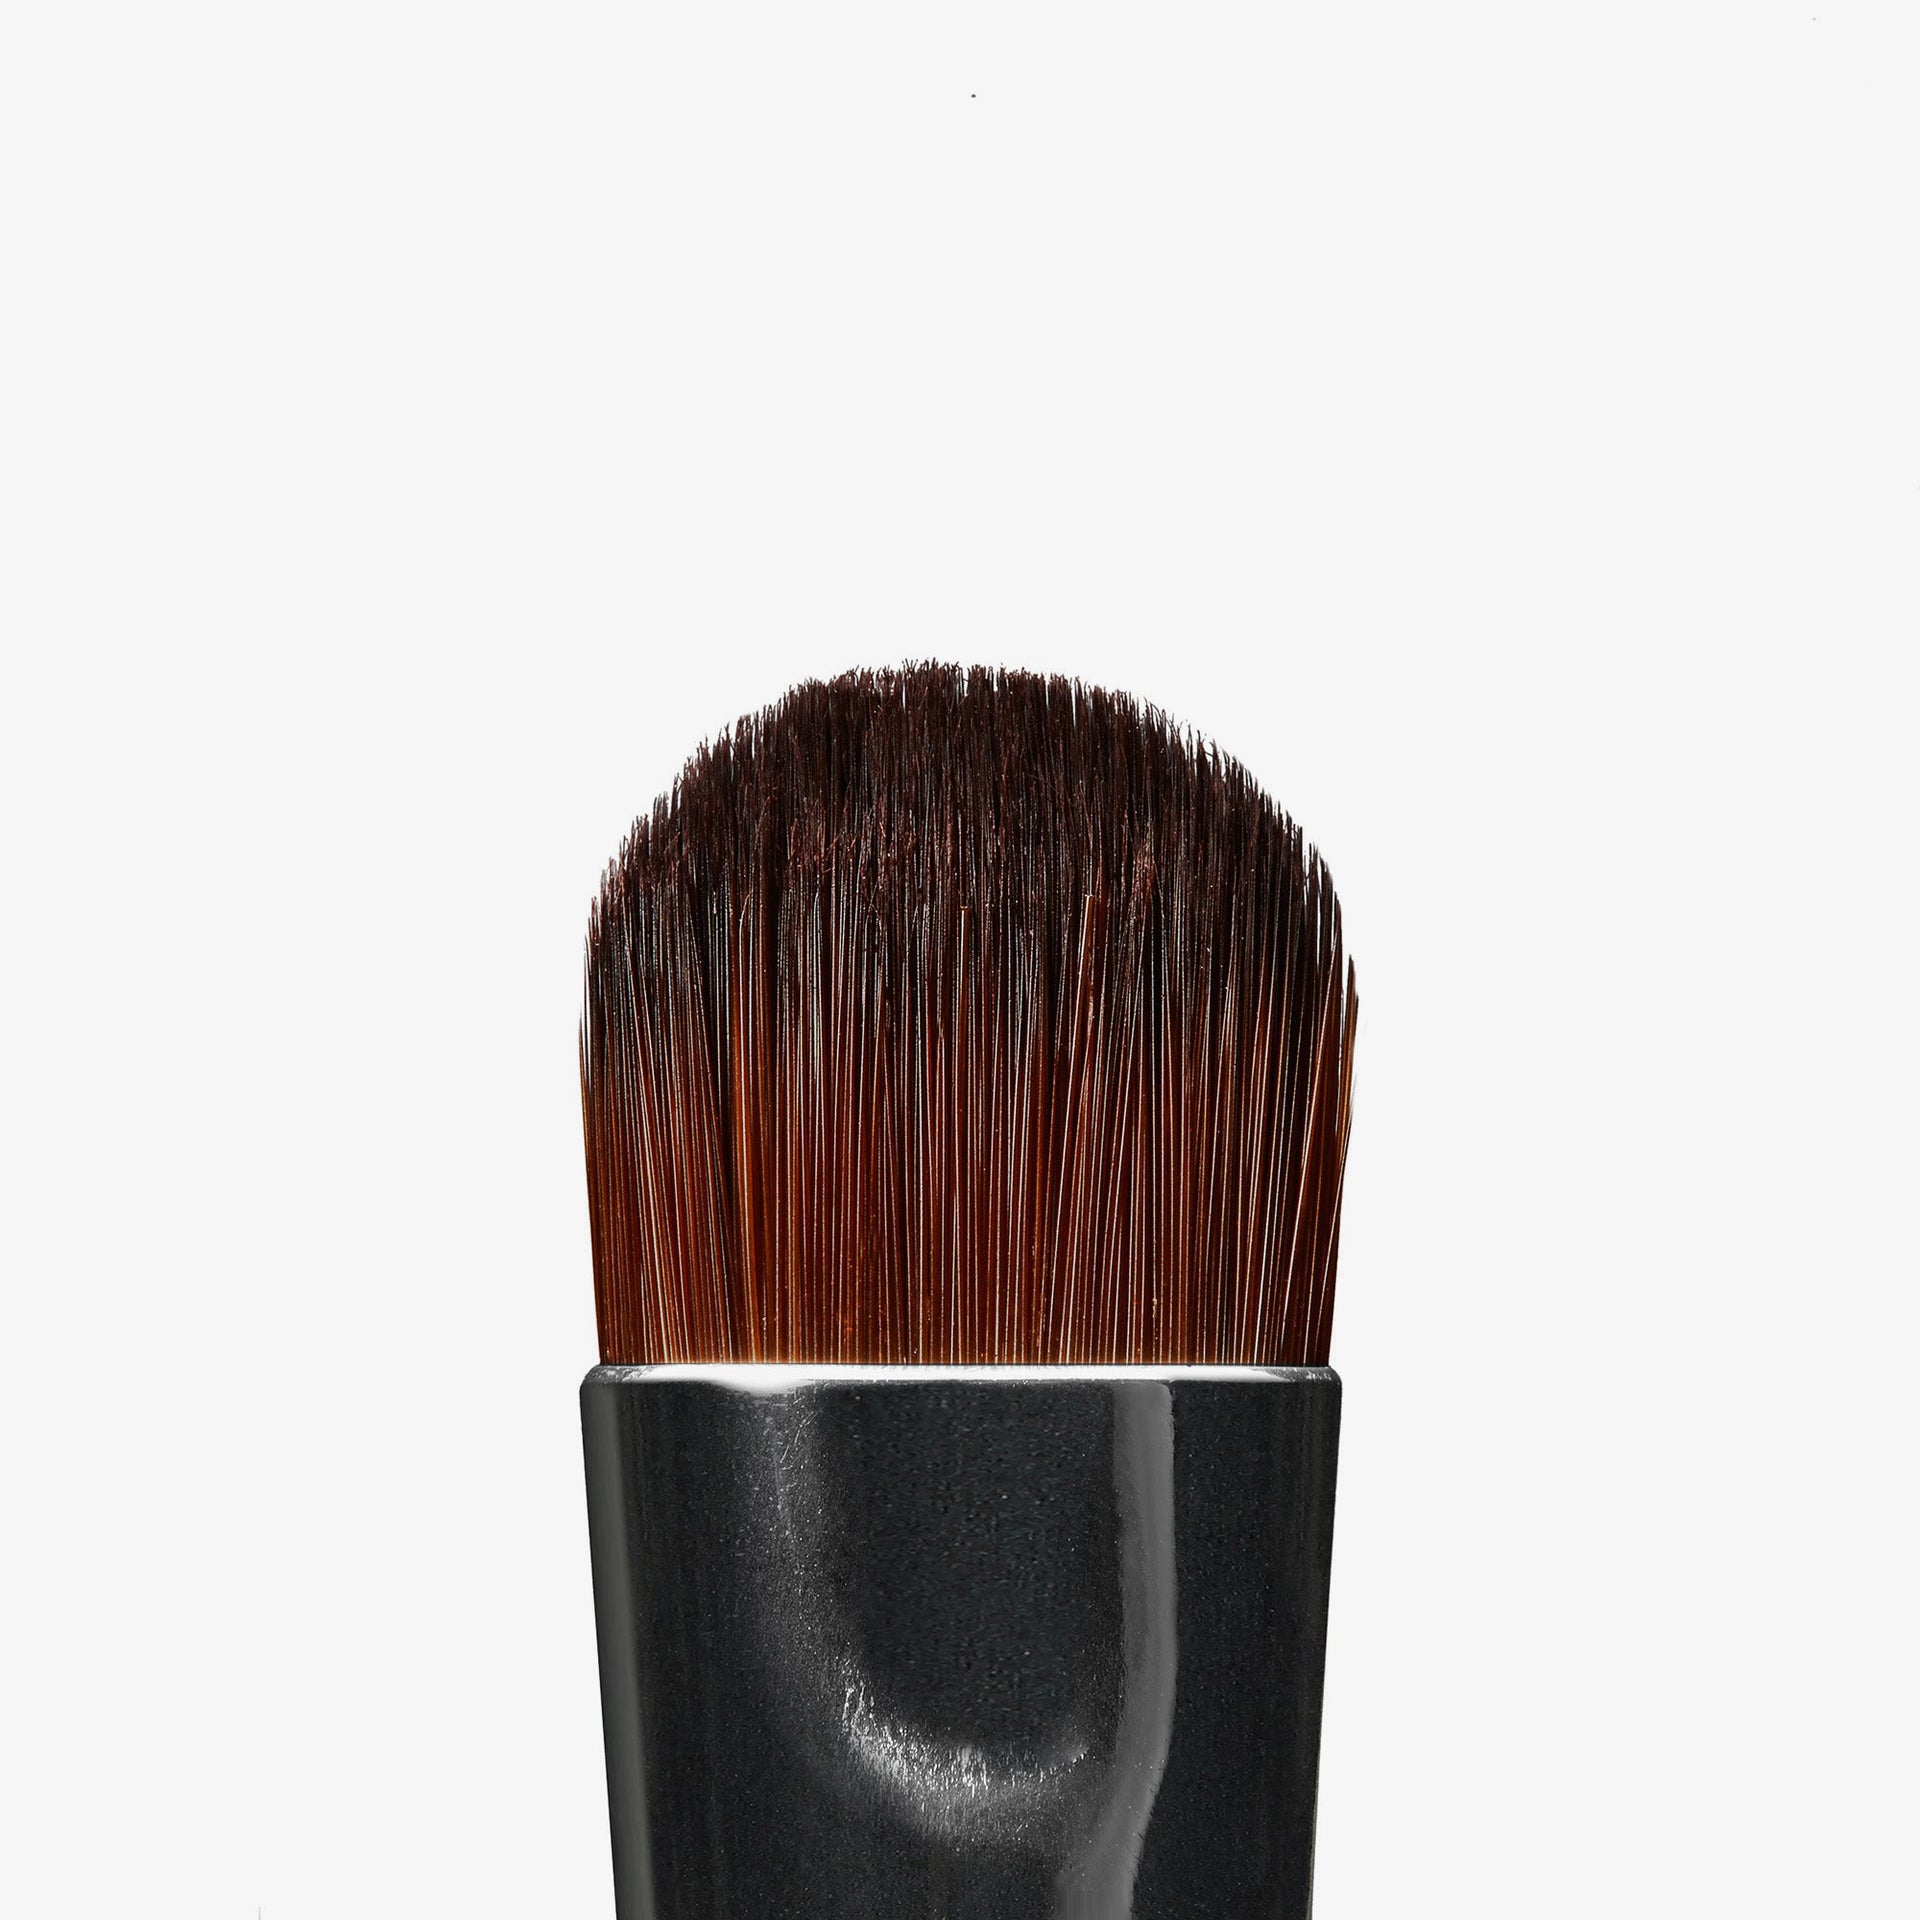 A27 Pro Brush - Small Firm Shader Brush